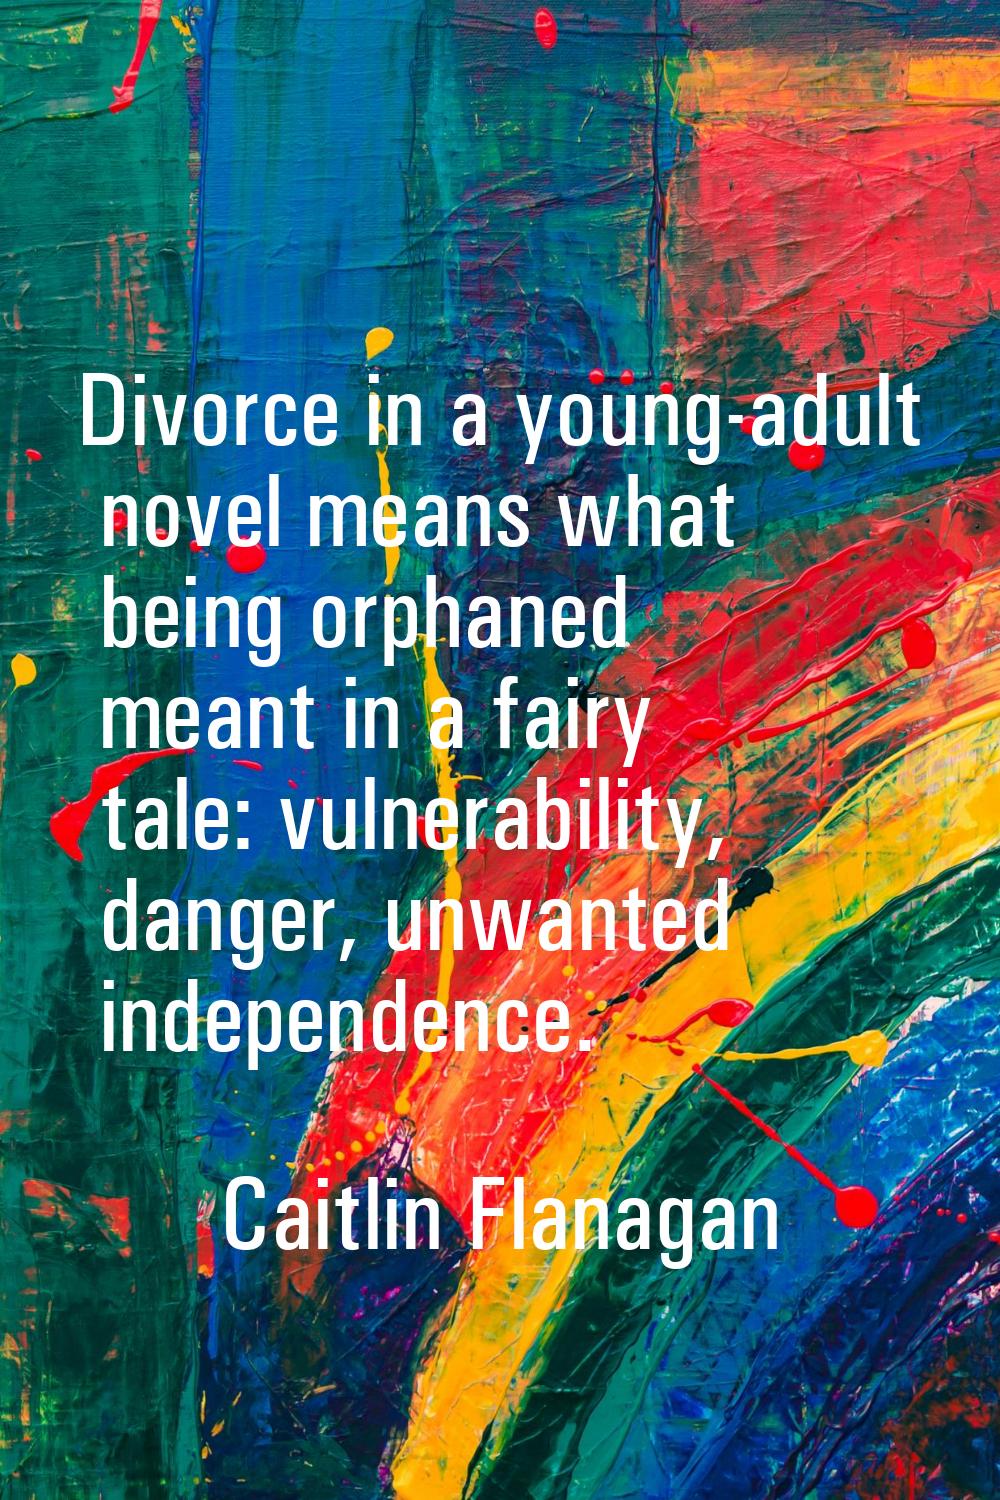 Divorce in a young-adult novel means what being orphaned meant in a fairy tale: vulnerability, dang